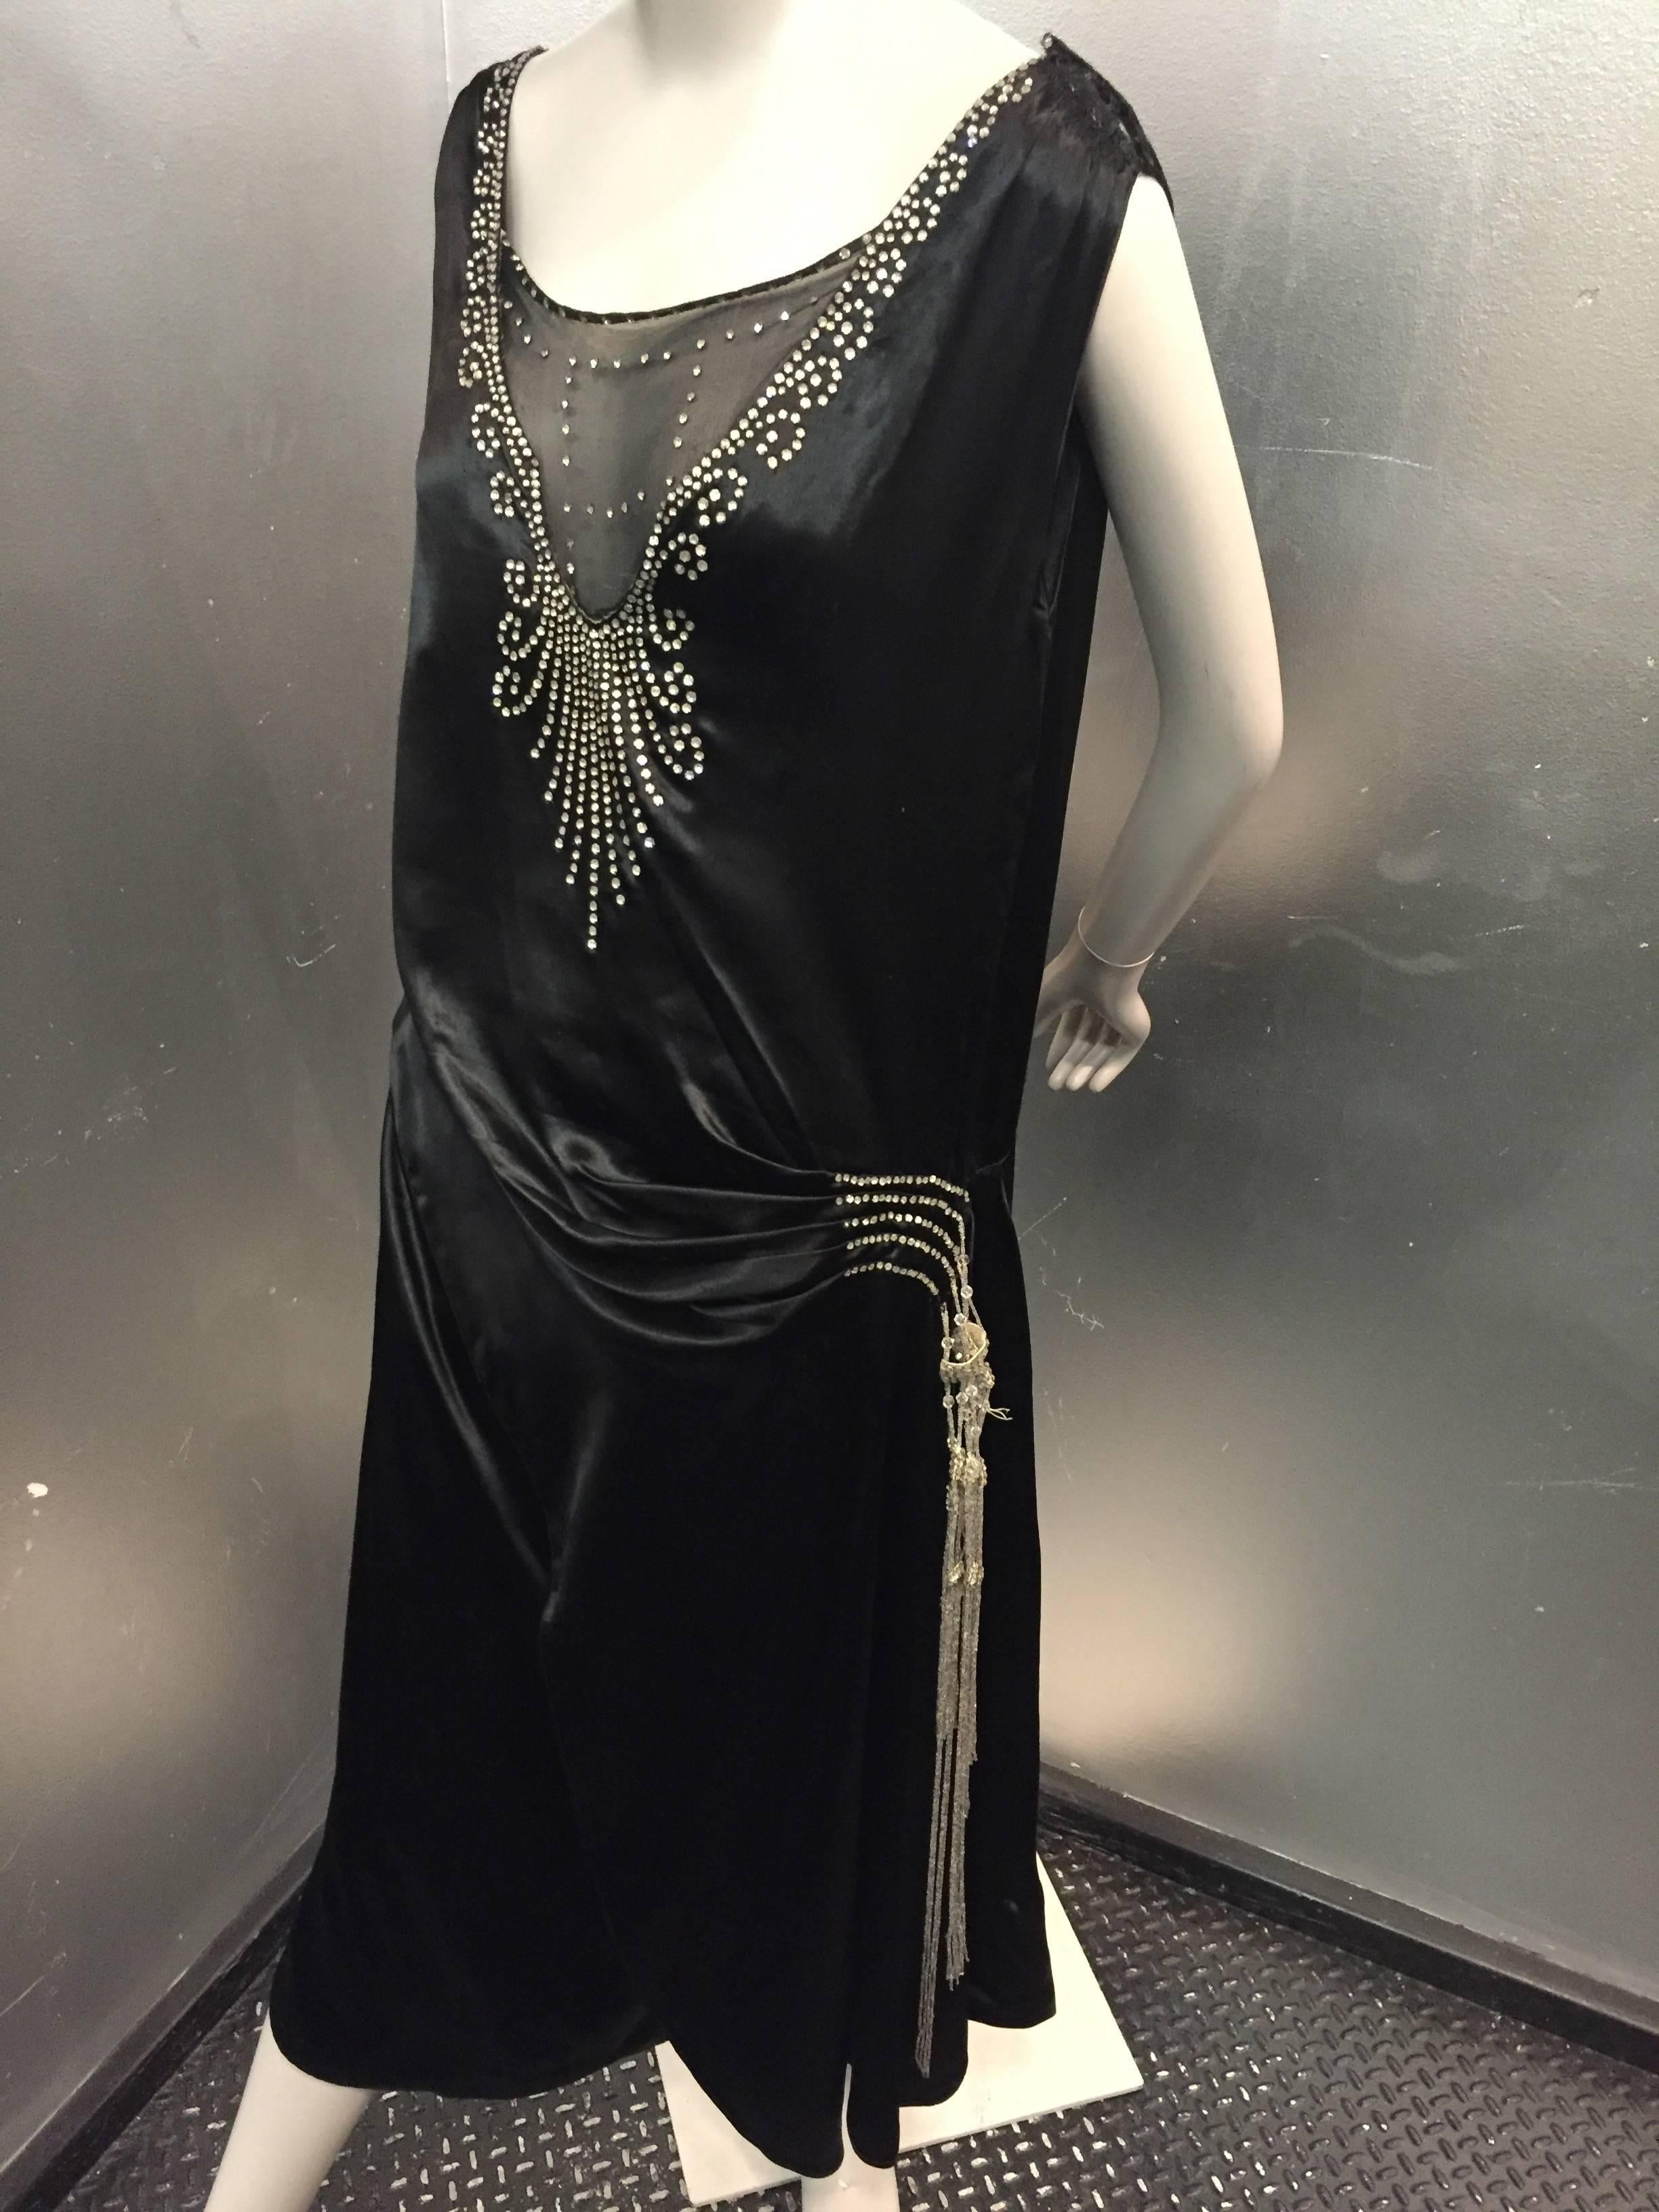 1920s Art Deco black silk satin Gatsby-style evening dress: Sheer chiffon panel at décolletage with elaborate beading and studded with rhinestones.  Drop-waist is draped to one side with heavy bead tassels. 